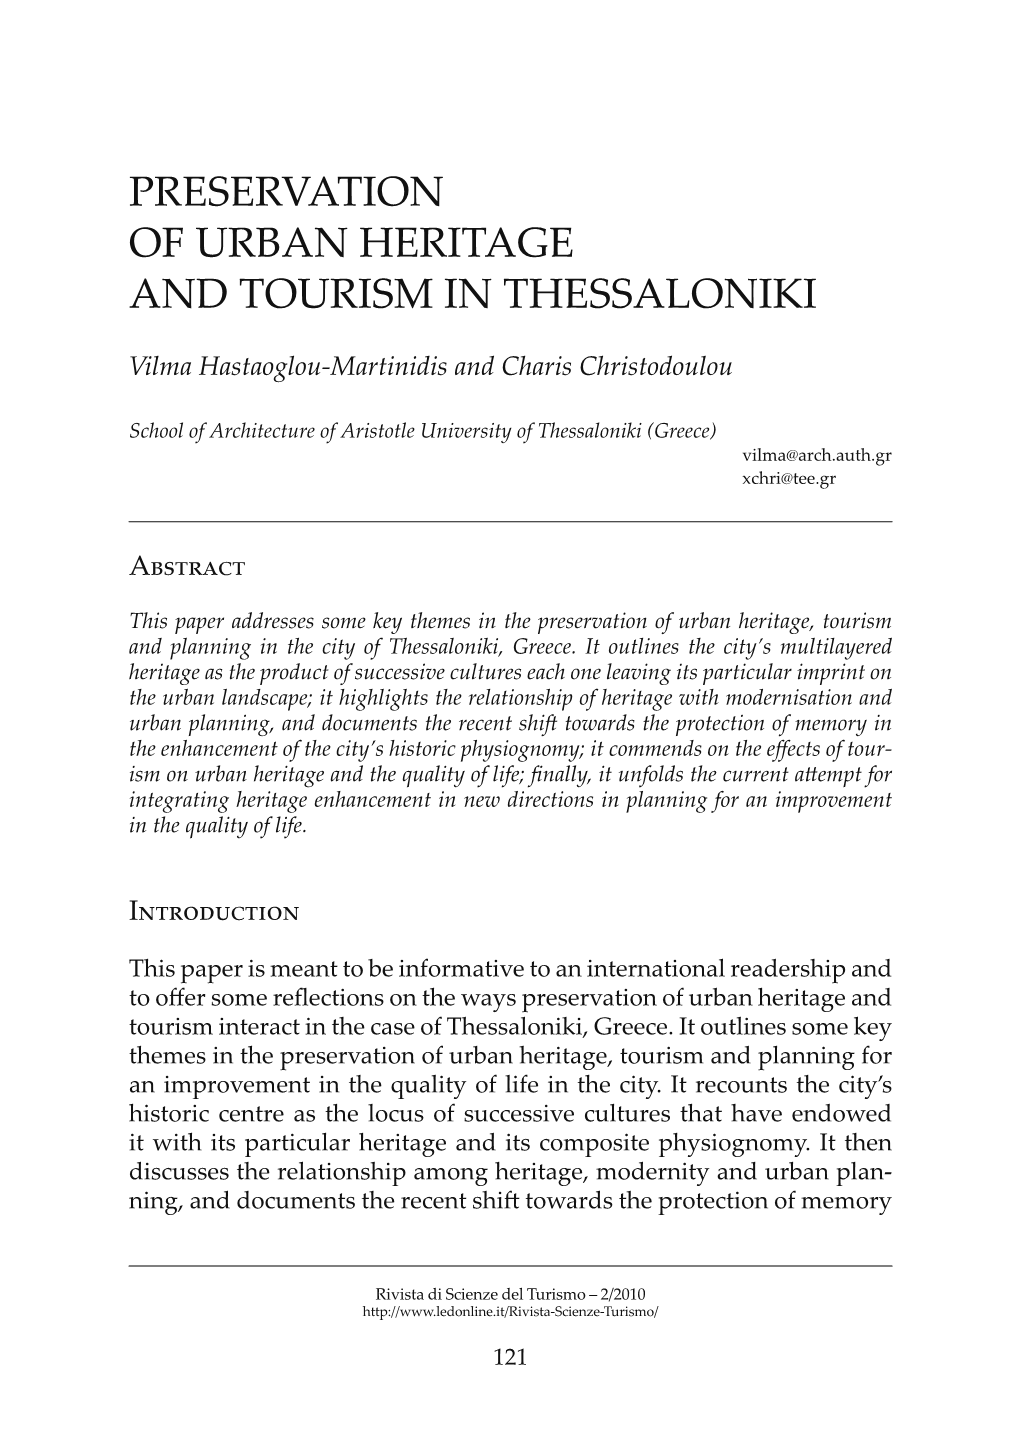 Preservation of Urban Heritage and Tourism in Thessaloniki